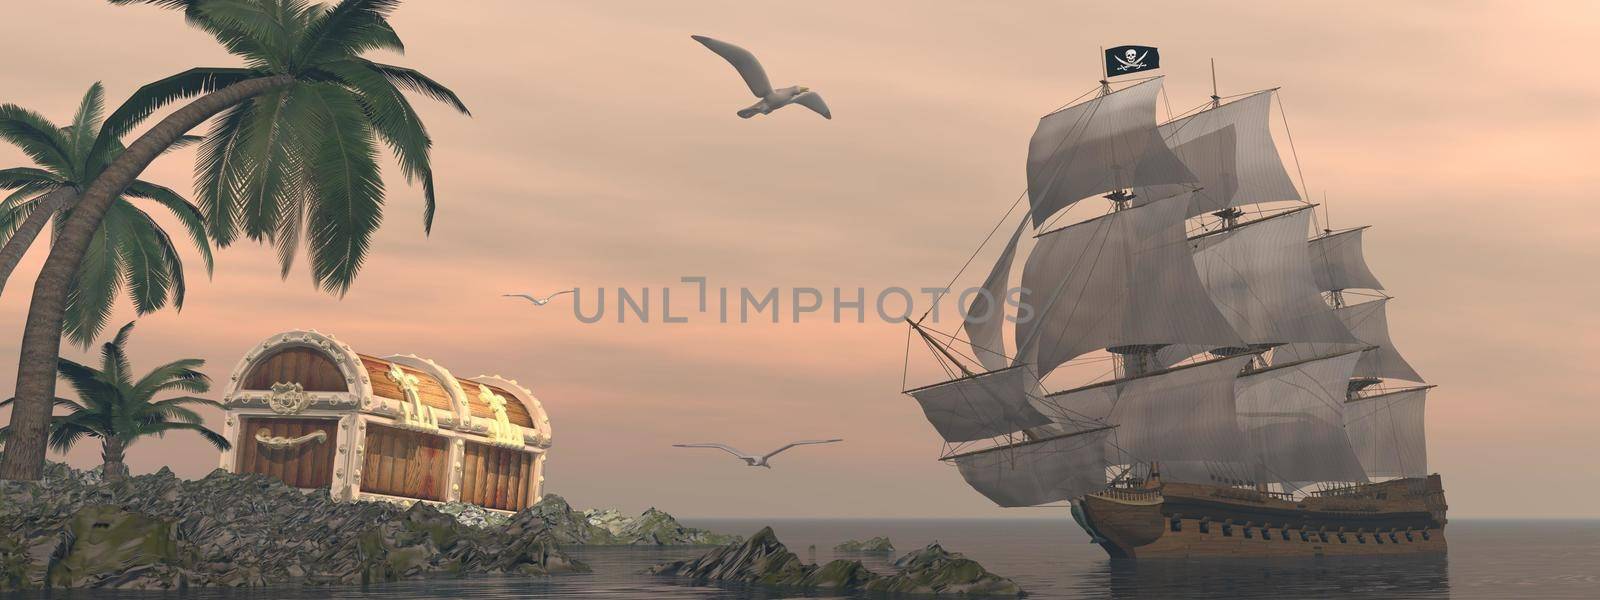 Pirate ship holding black Jolly Roger flag floating on the ocean toward and island showing treasure box by cloudy sunset with seagulls flying